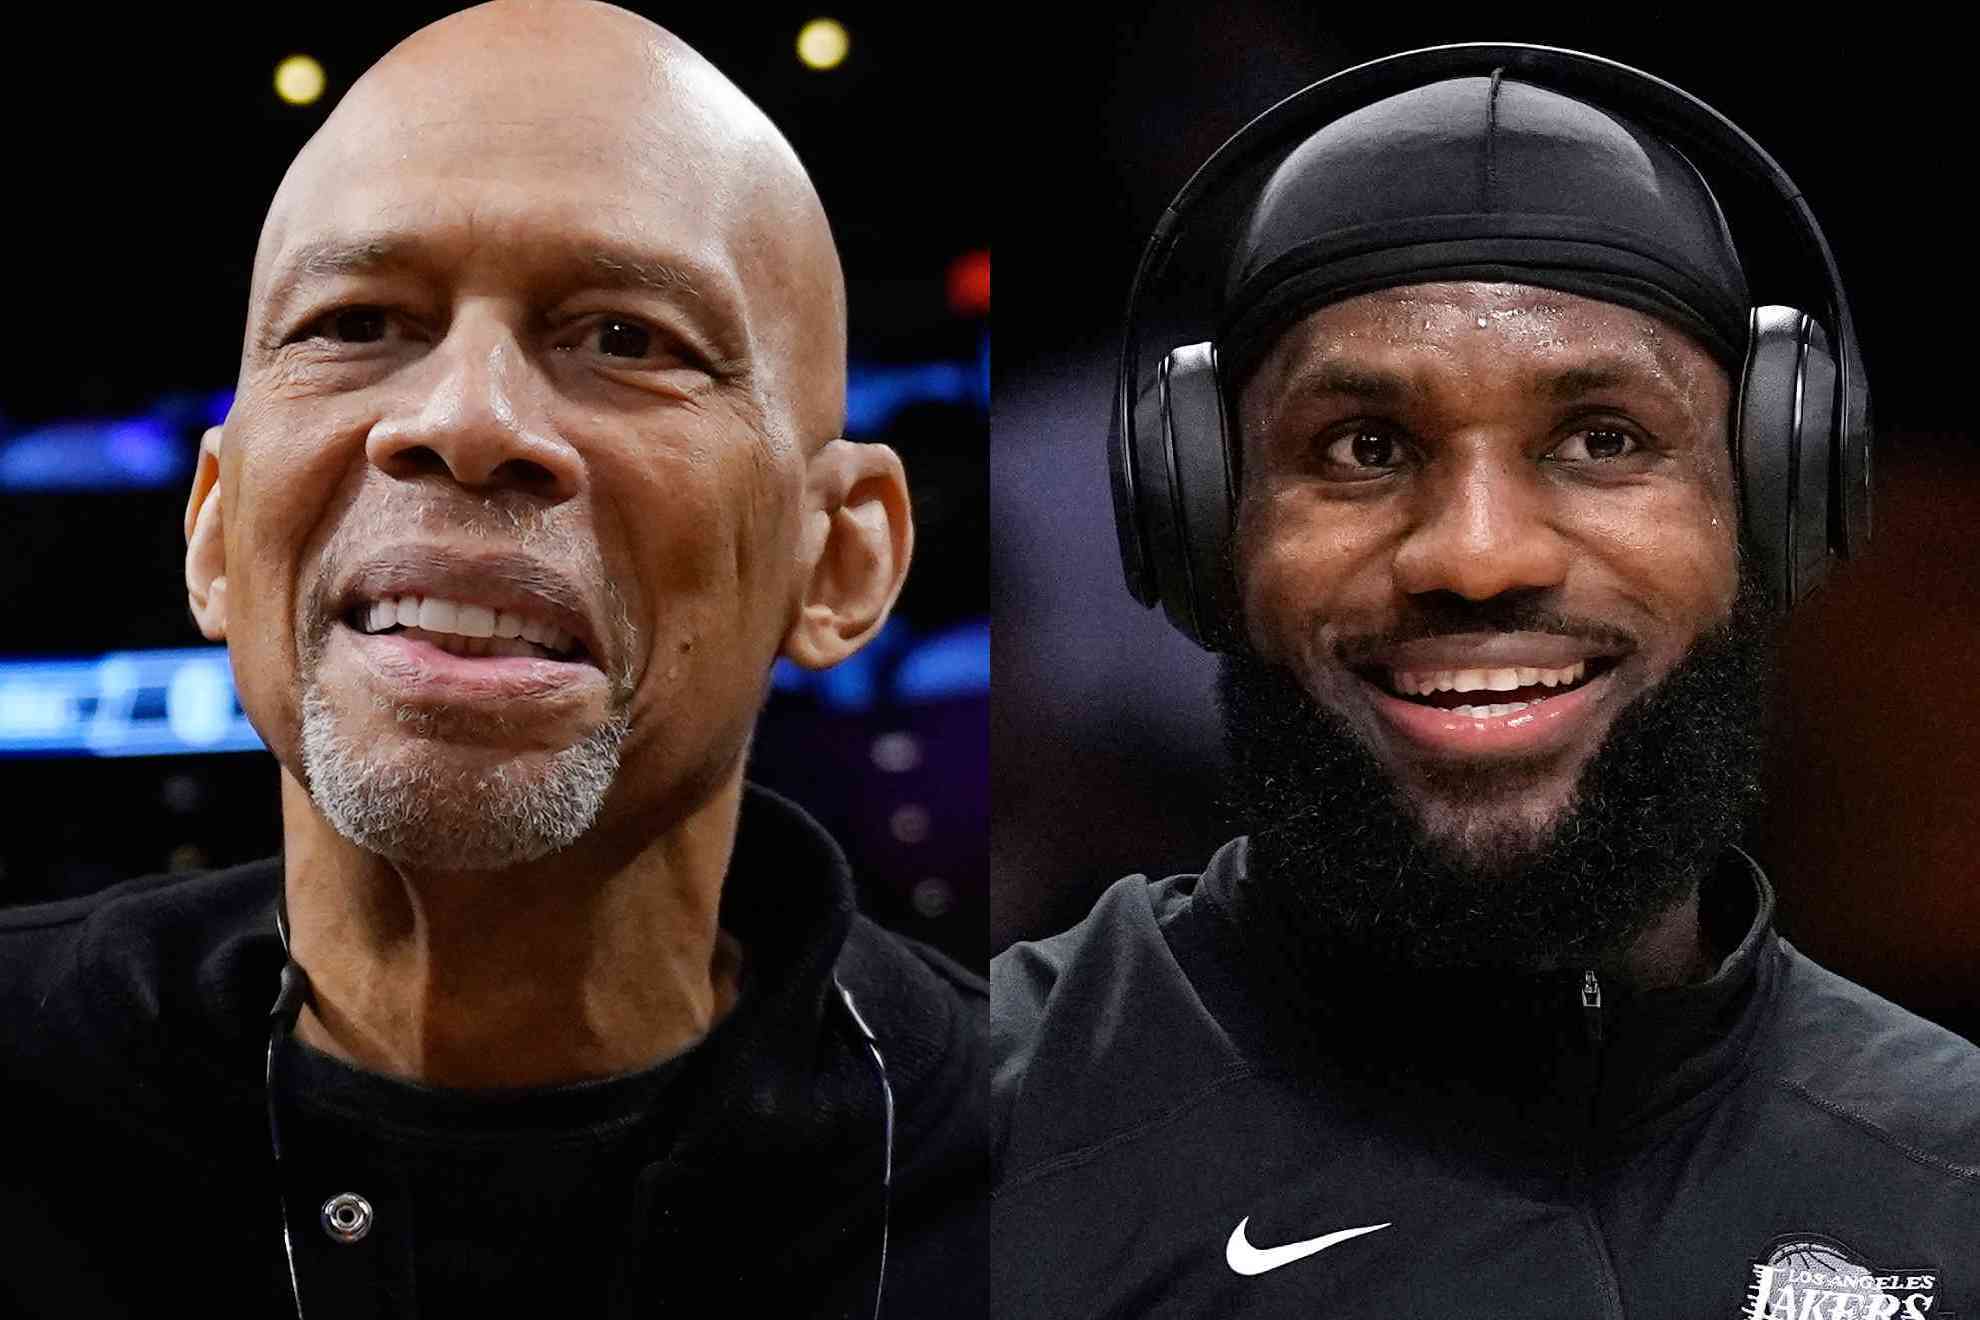 While the "King" is taking the throne for most points scored in NBA regular season history, we introduce you to the seven players who were fortunate enough to be opponents on the court of these two basketball legends.